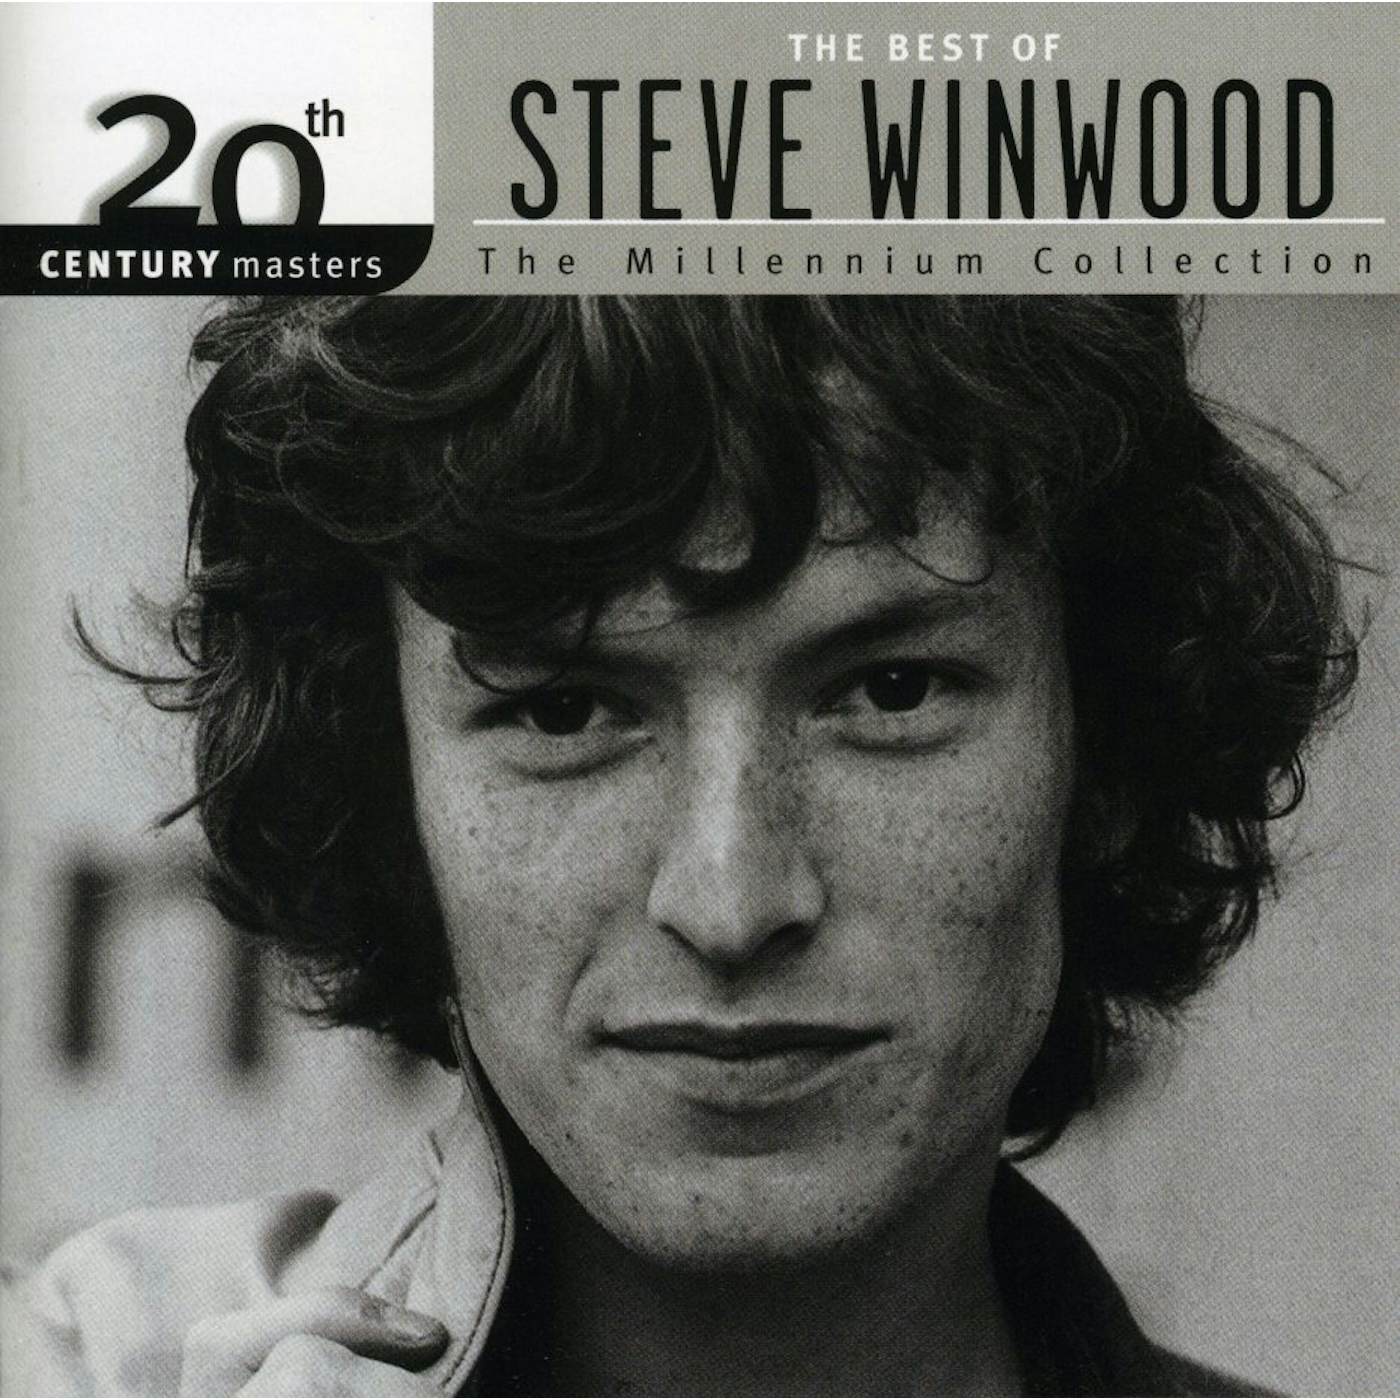 Steve Winwood 20TH CENTURY MASTERS: COLLECTION CD